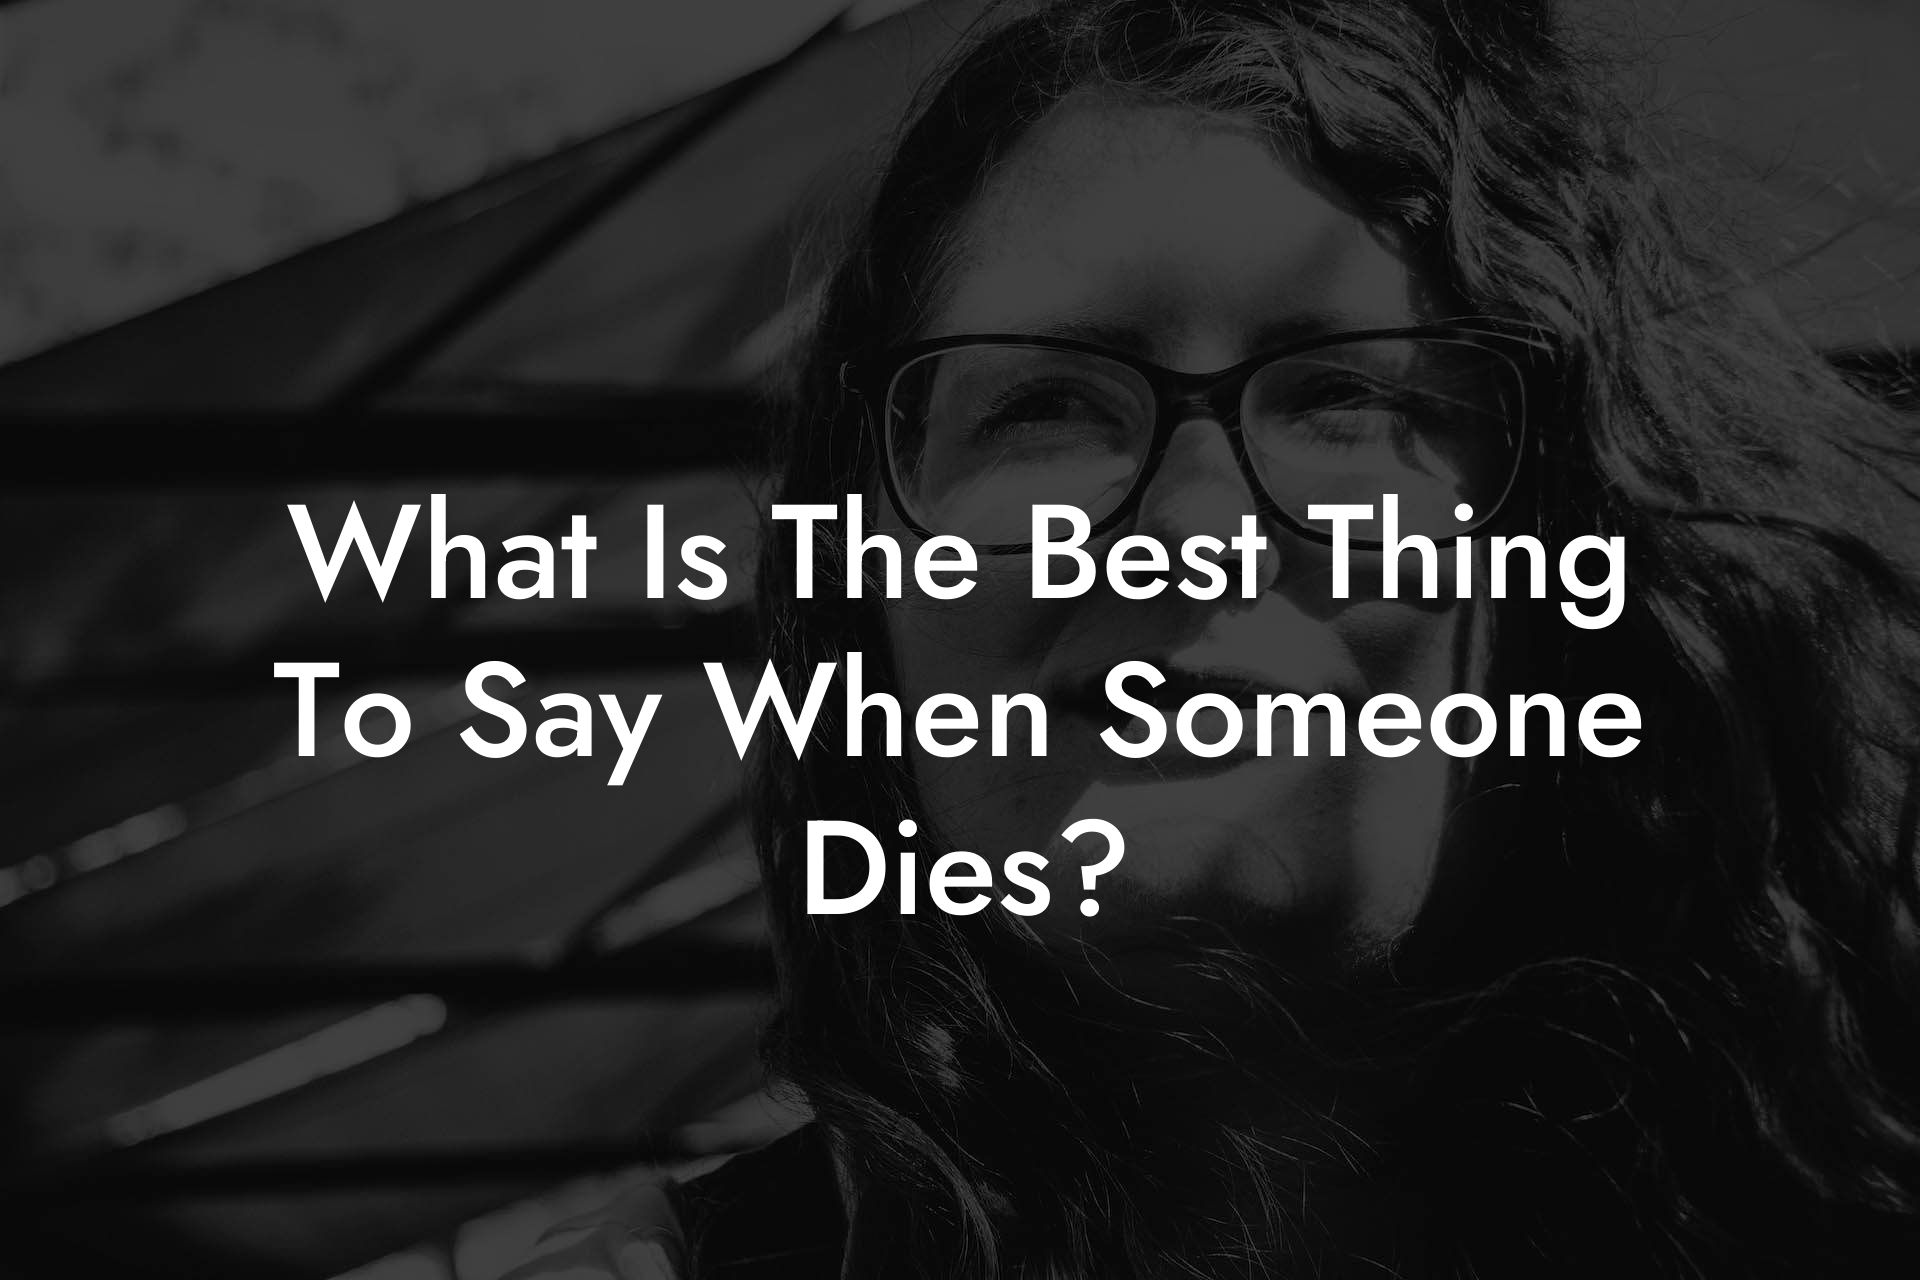 What Is The Best Thing To Say When Someone Dies?